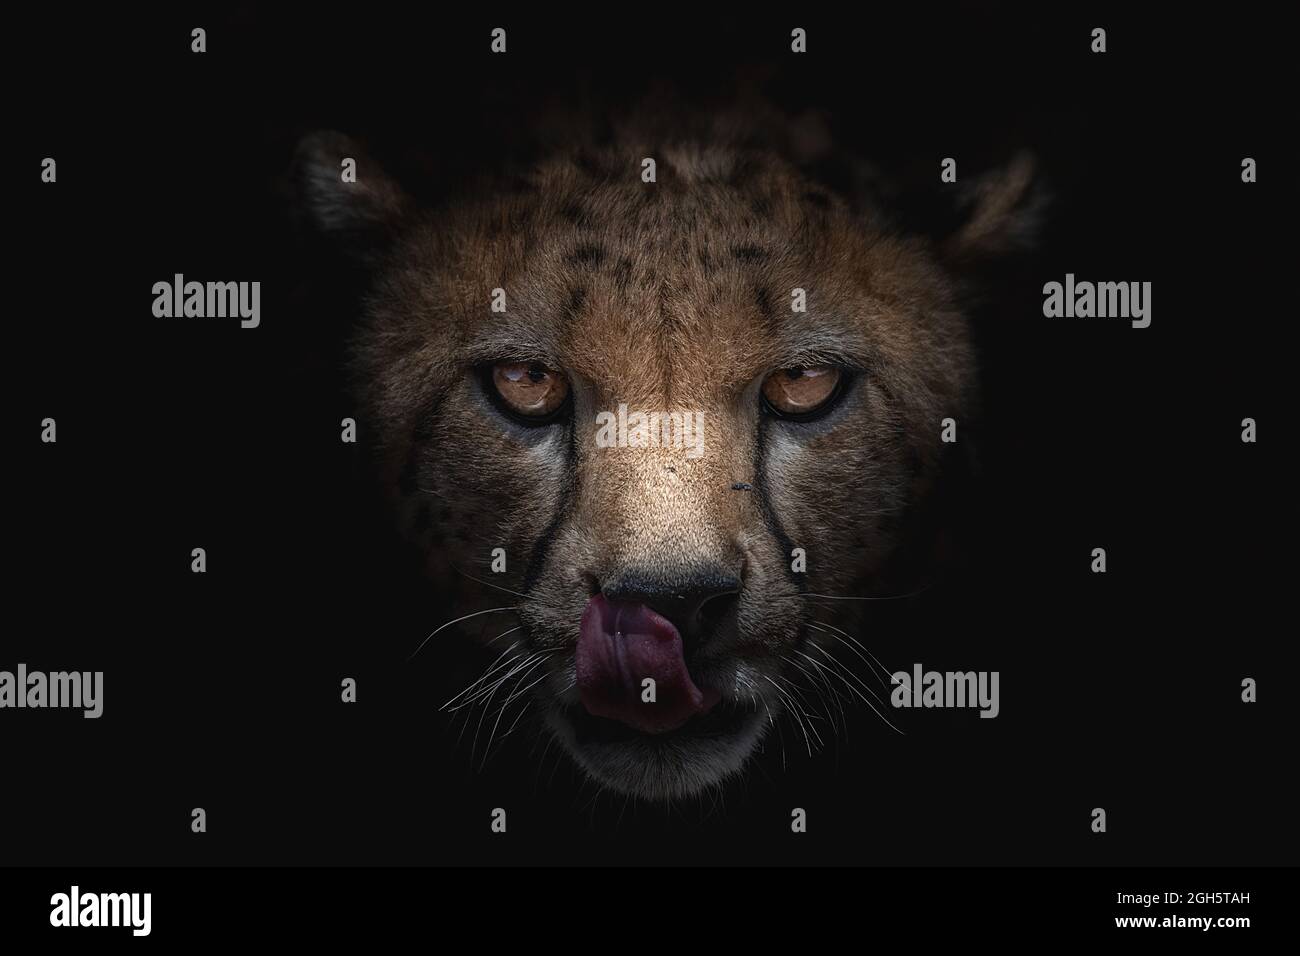 Powerful cheetah with spots on fur licking muzzle with shade while looking at camera on black background Stock Photo